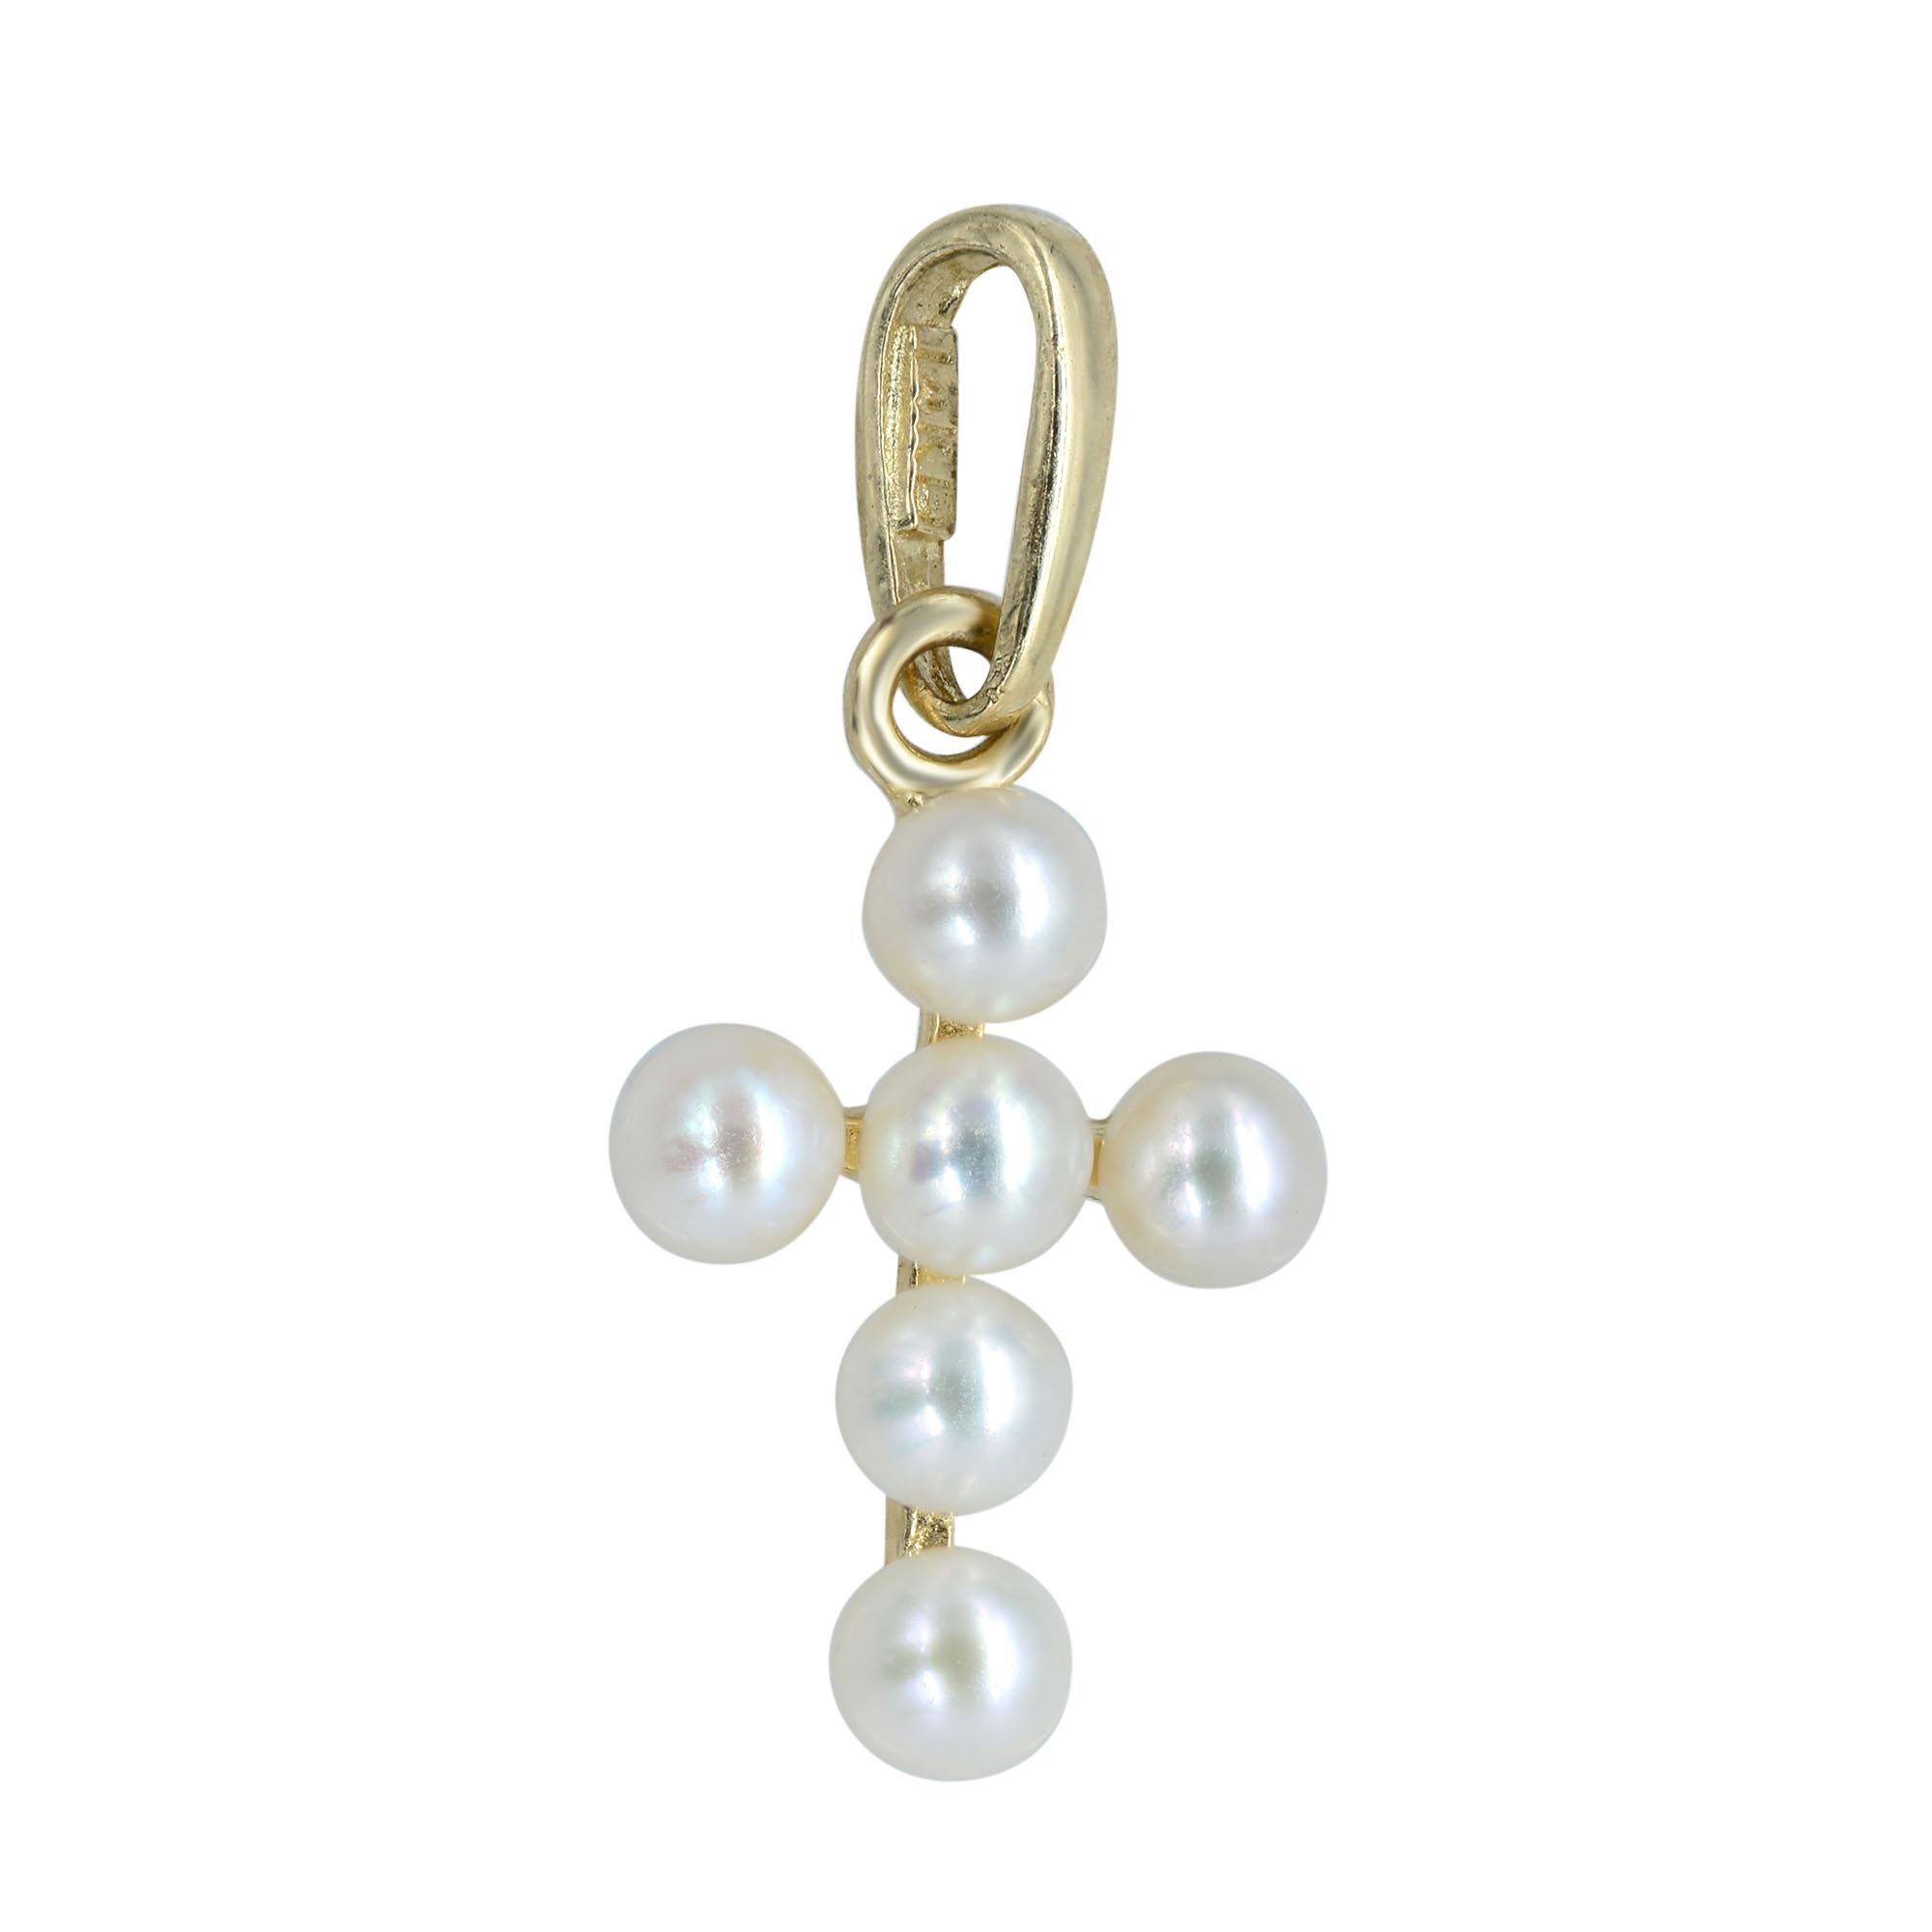 A cute and delicate tiny pearl cross pendant in 14K yellow gold. Measurements: 10mm long. Total weight: 0.3 gms. Comes with a presentable gift box. 